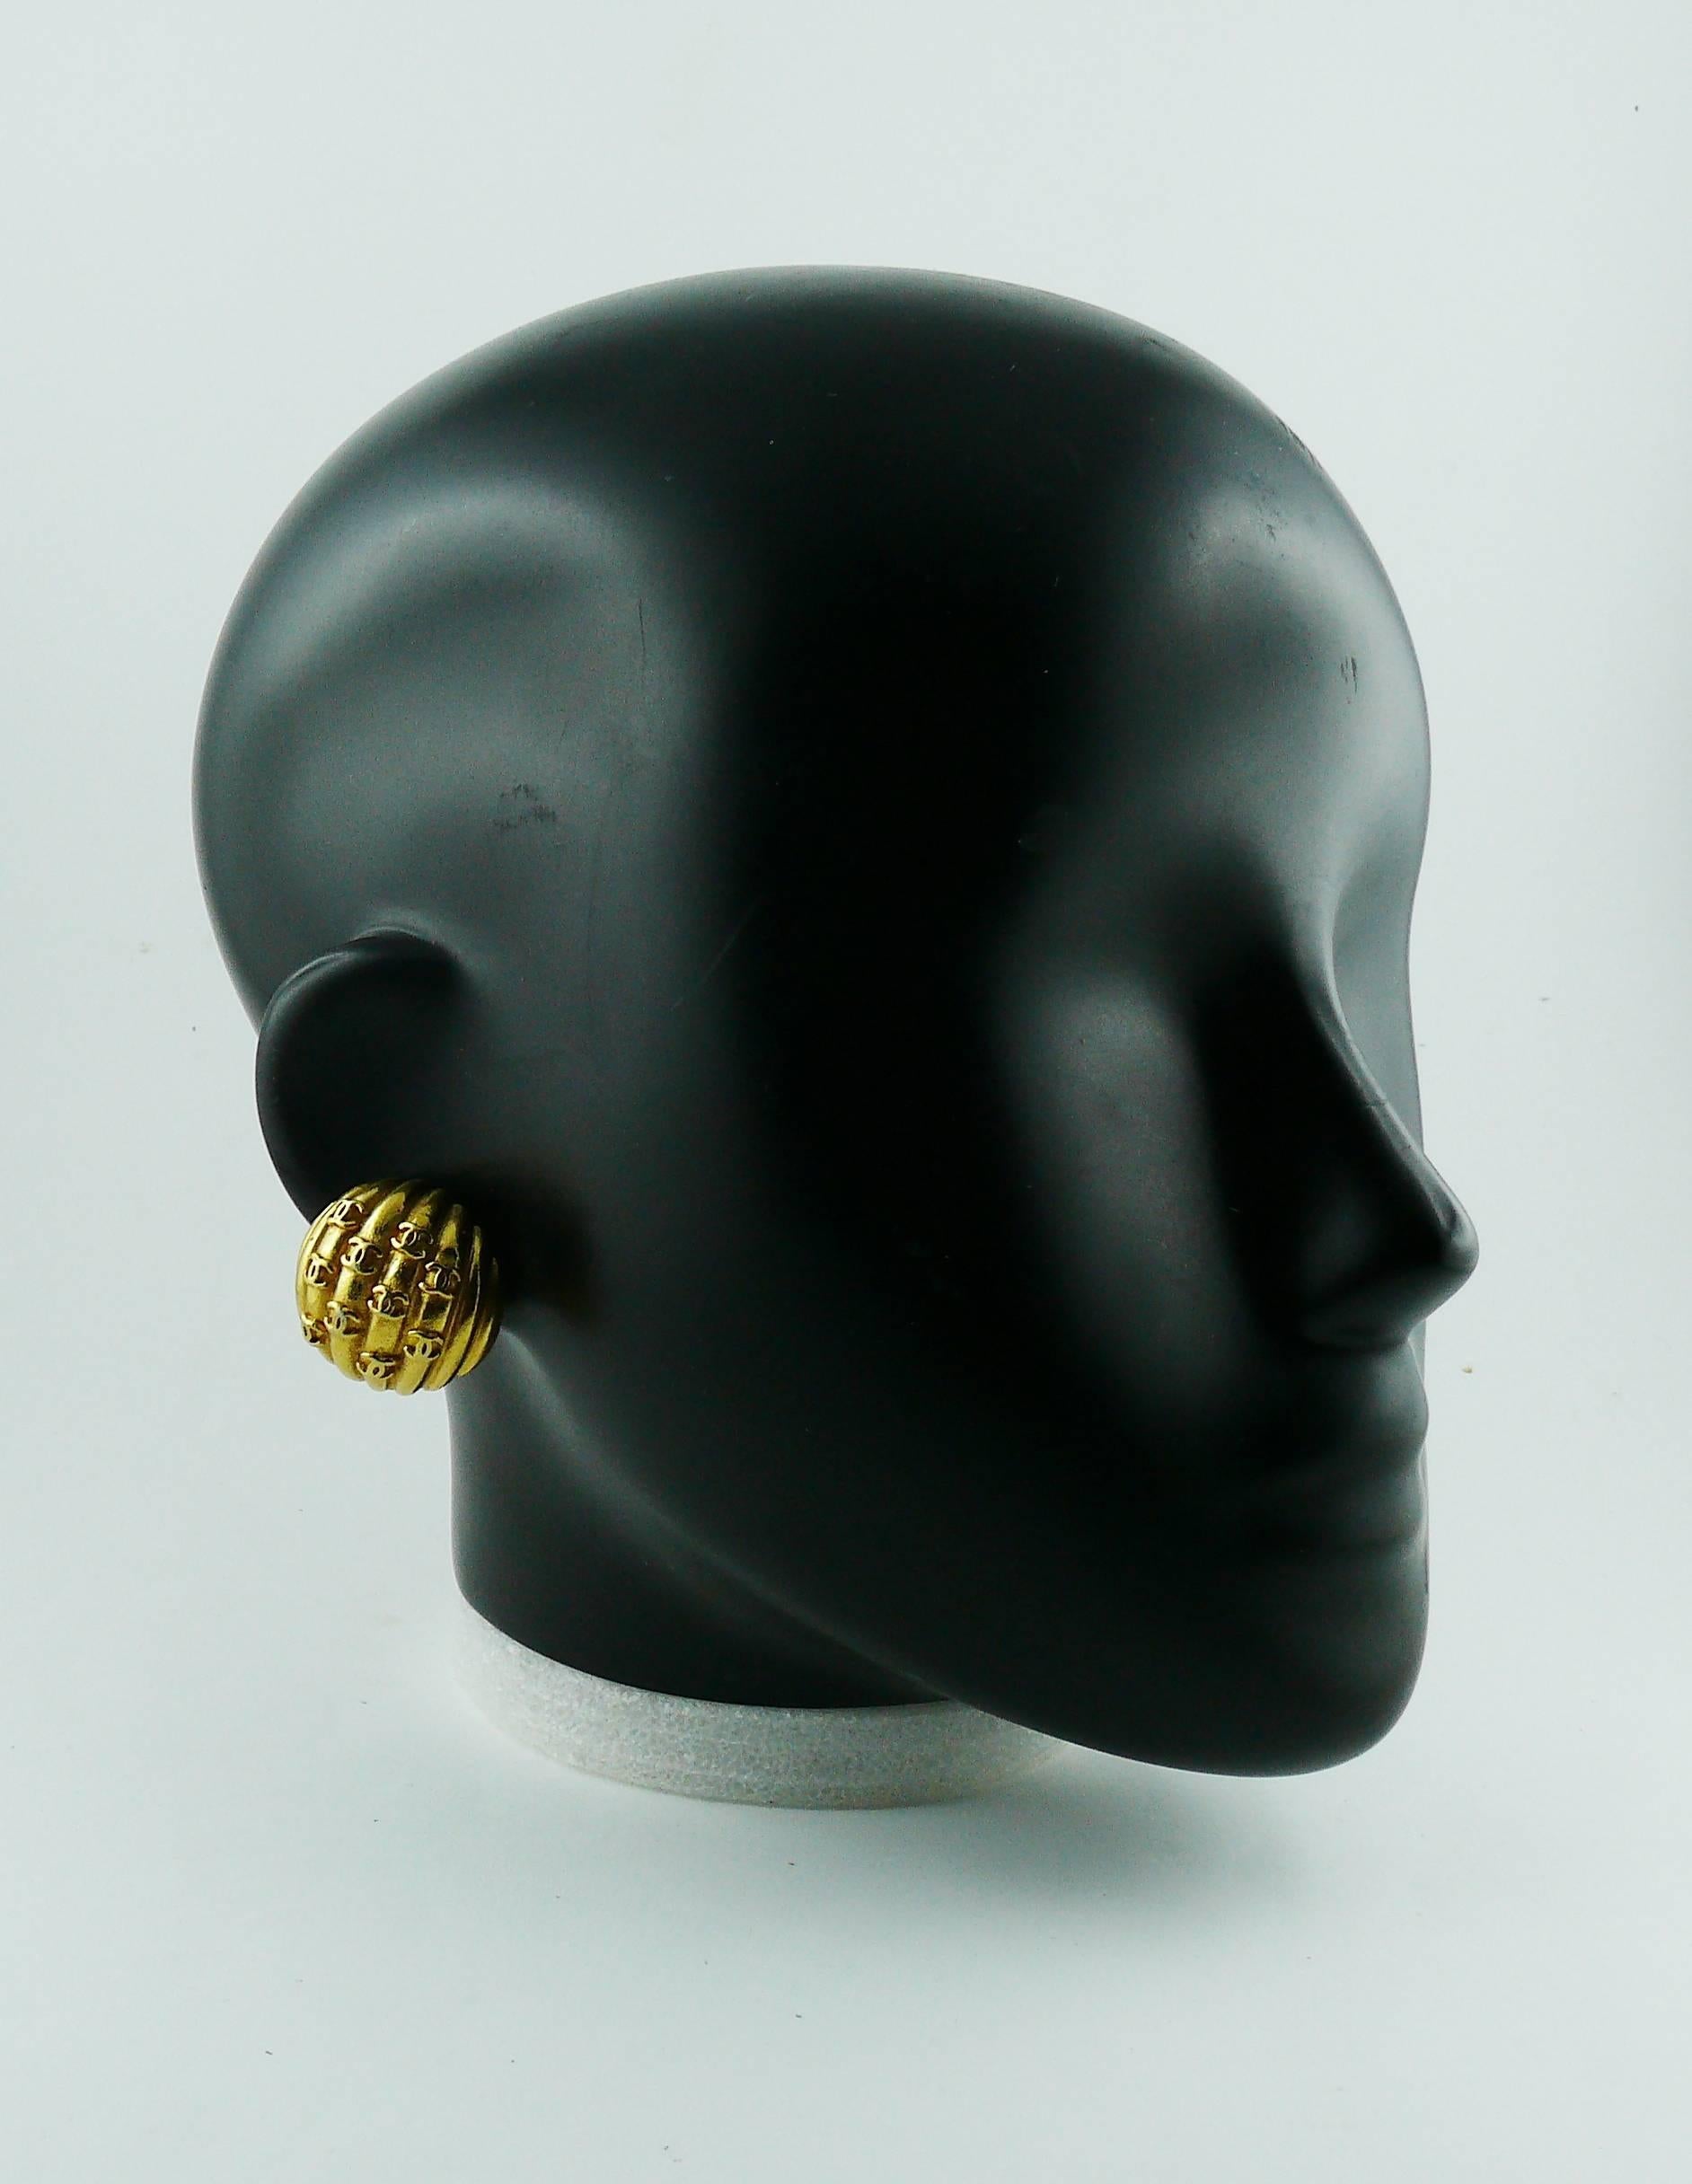 Chanel vintage gold toned dome clip-on earrings featuring CC logos all over.

Embossed CHANEL Made in France.
Private sale 